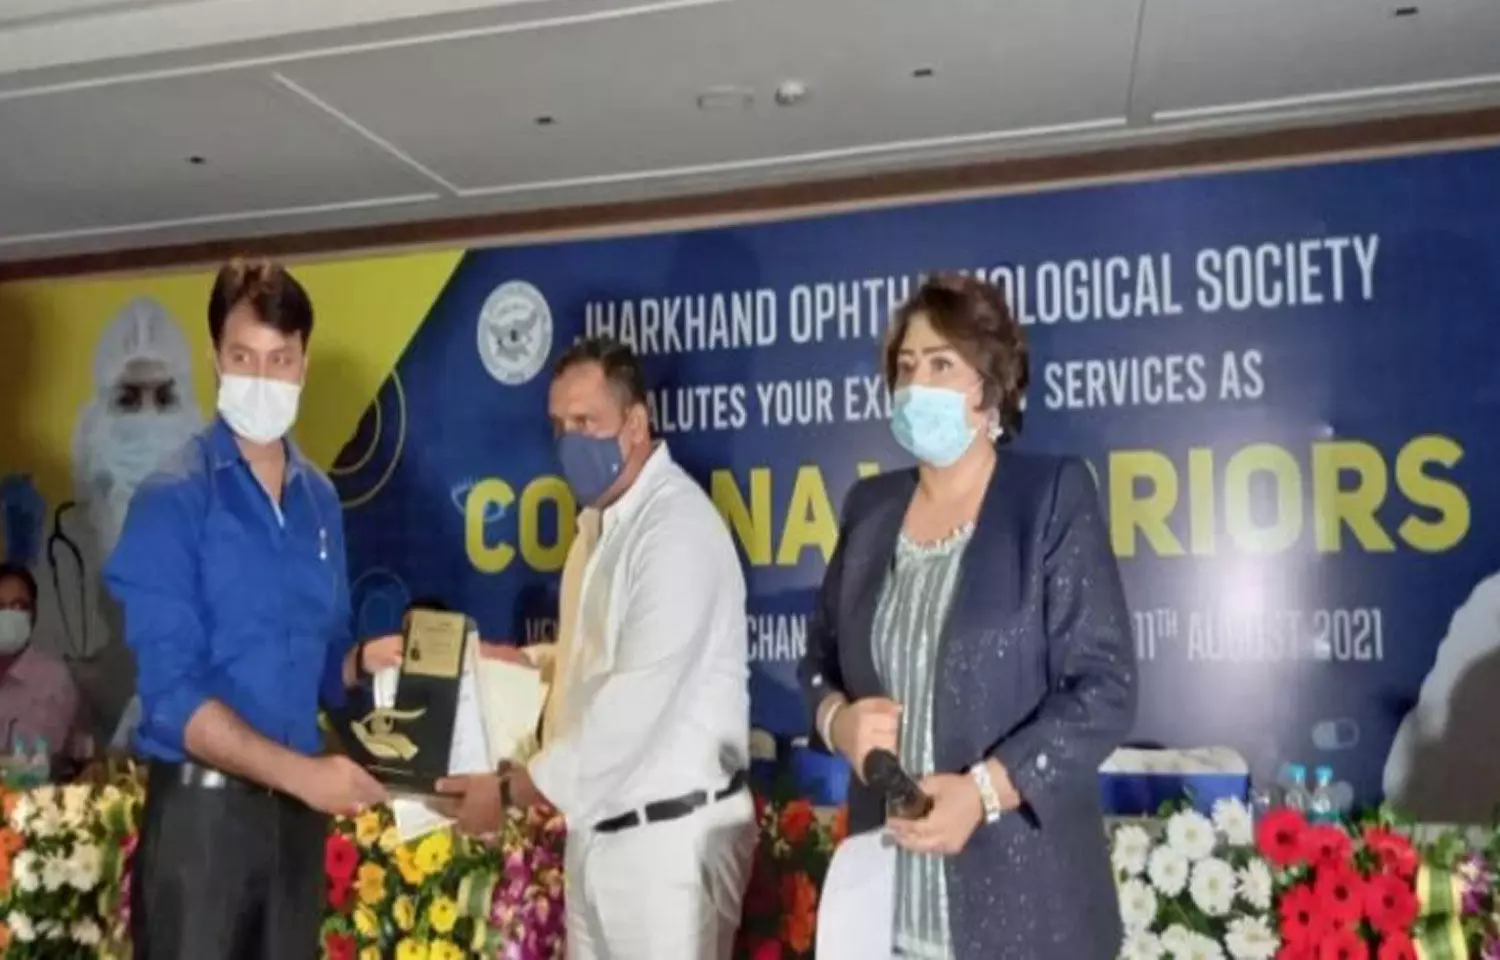 Jharkhand Health Minister felicitates 45 ophthalmologists for COVID service, confirms proposal of Medical Protection Act